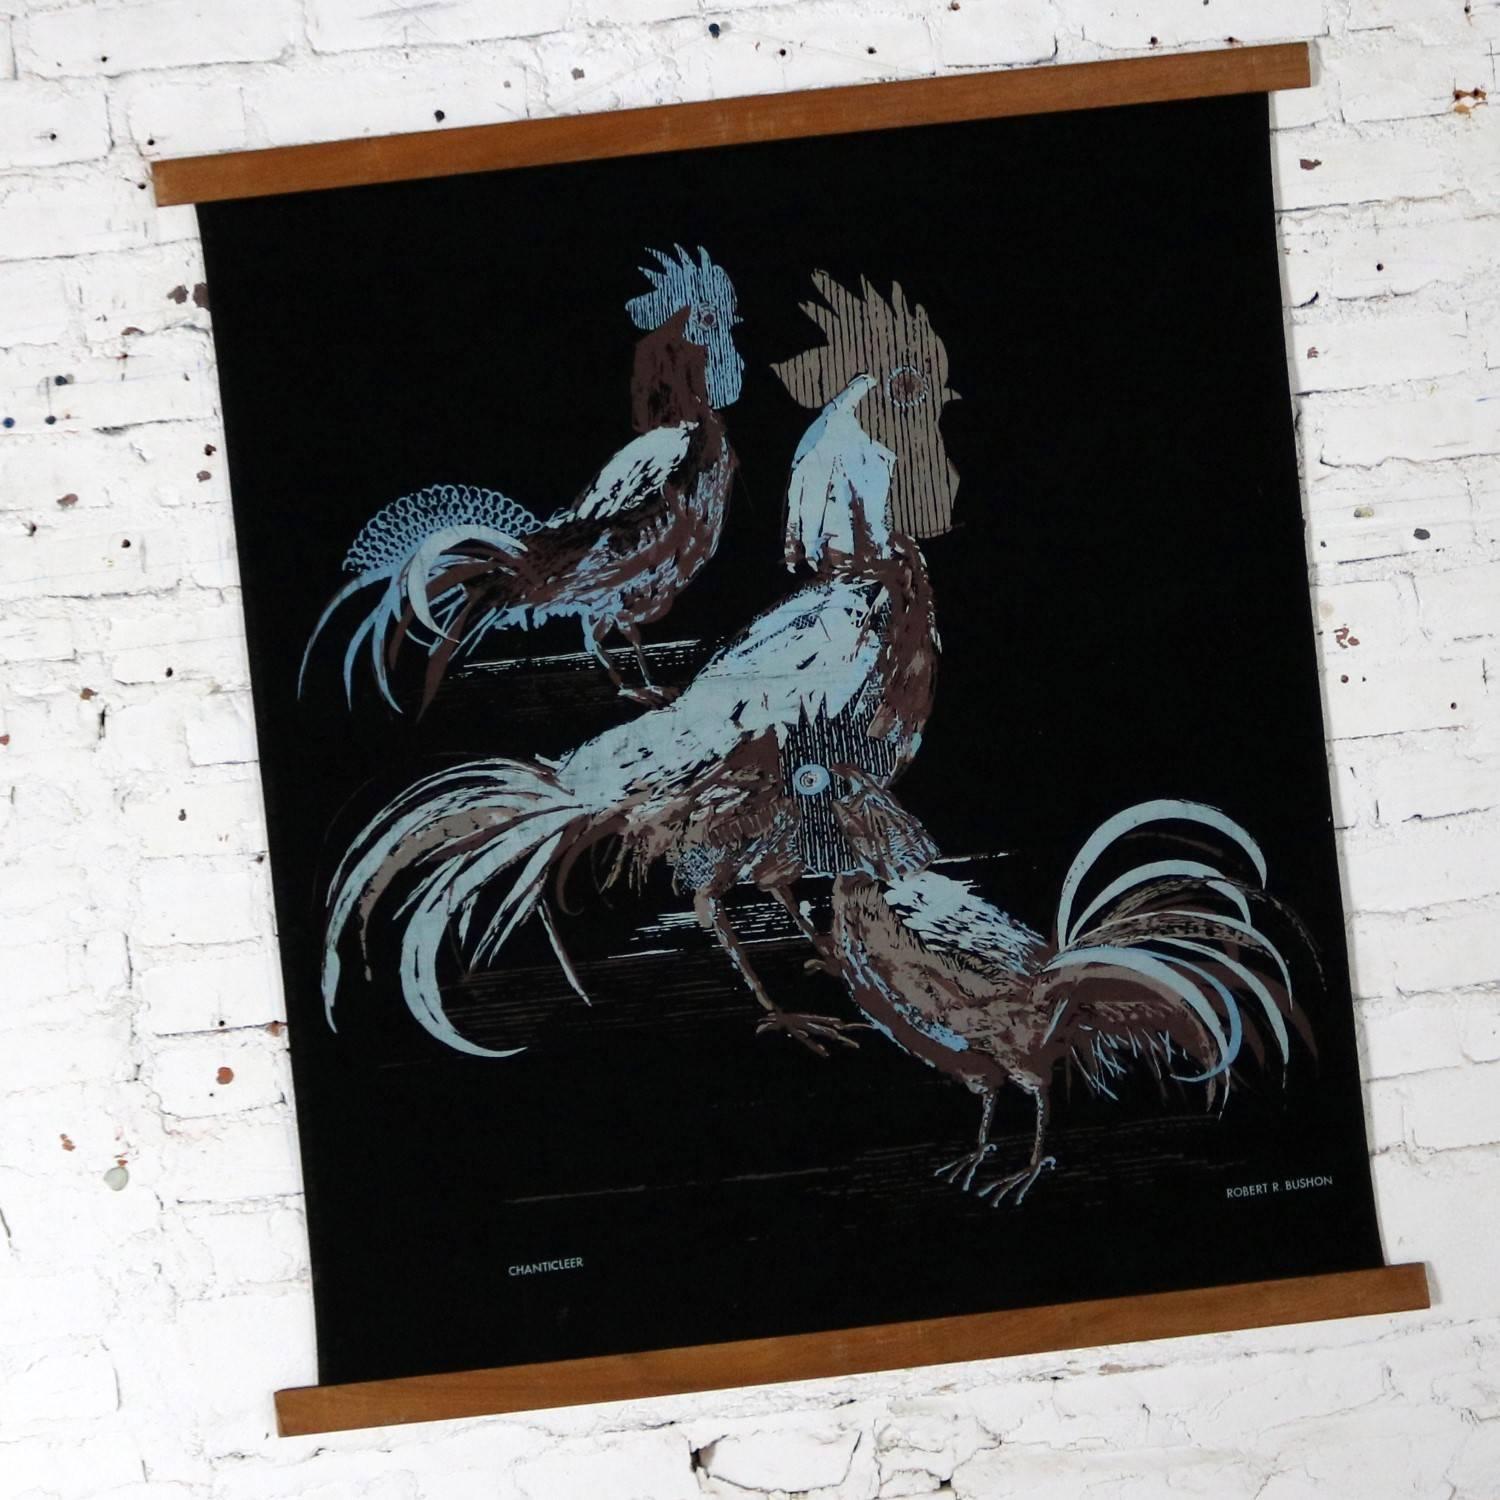 Wonderful Mid-Century Modern silkscreen wall scroll titled Chanticleer by Robert R. Bushong for Tom Tru and distributed by Raymor. It is in fantastic vintage condition and circa 1959.

I’ve recently become attracted to roosters and chickens in